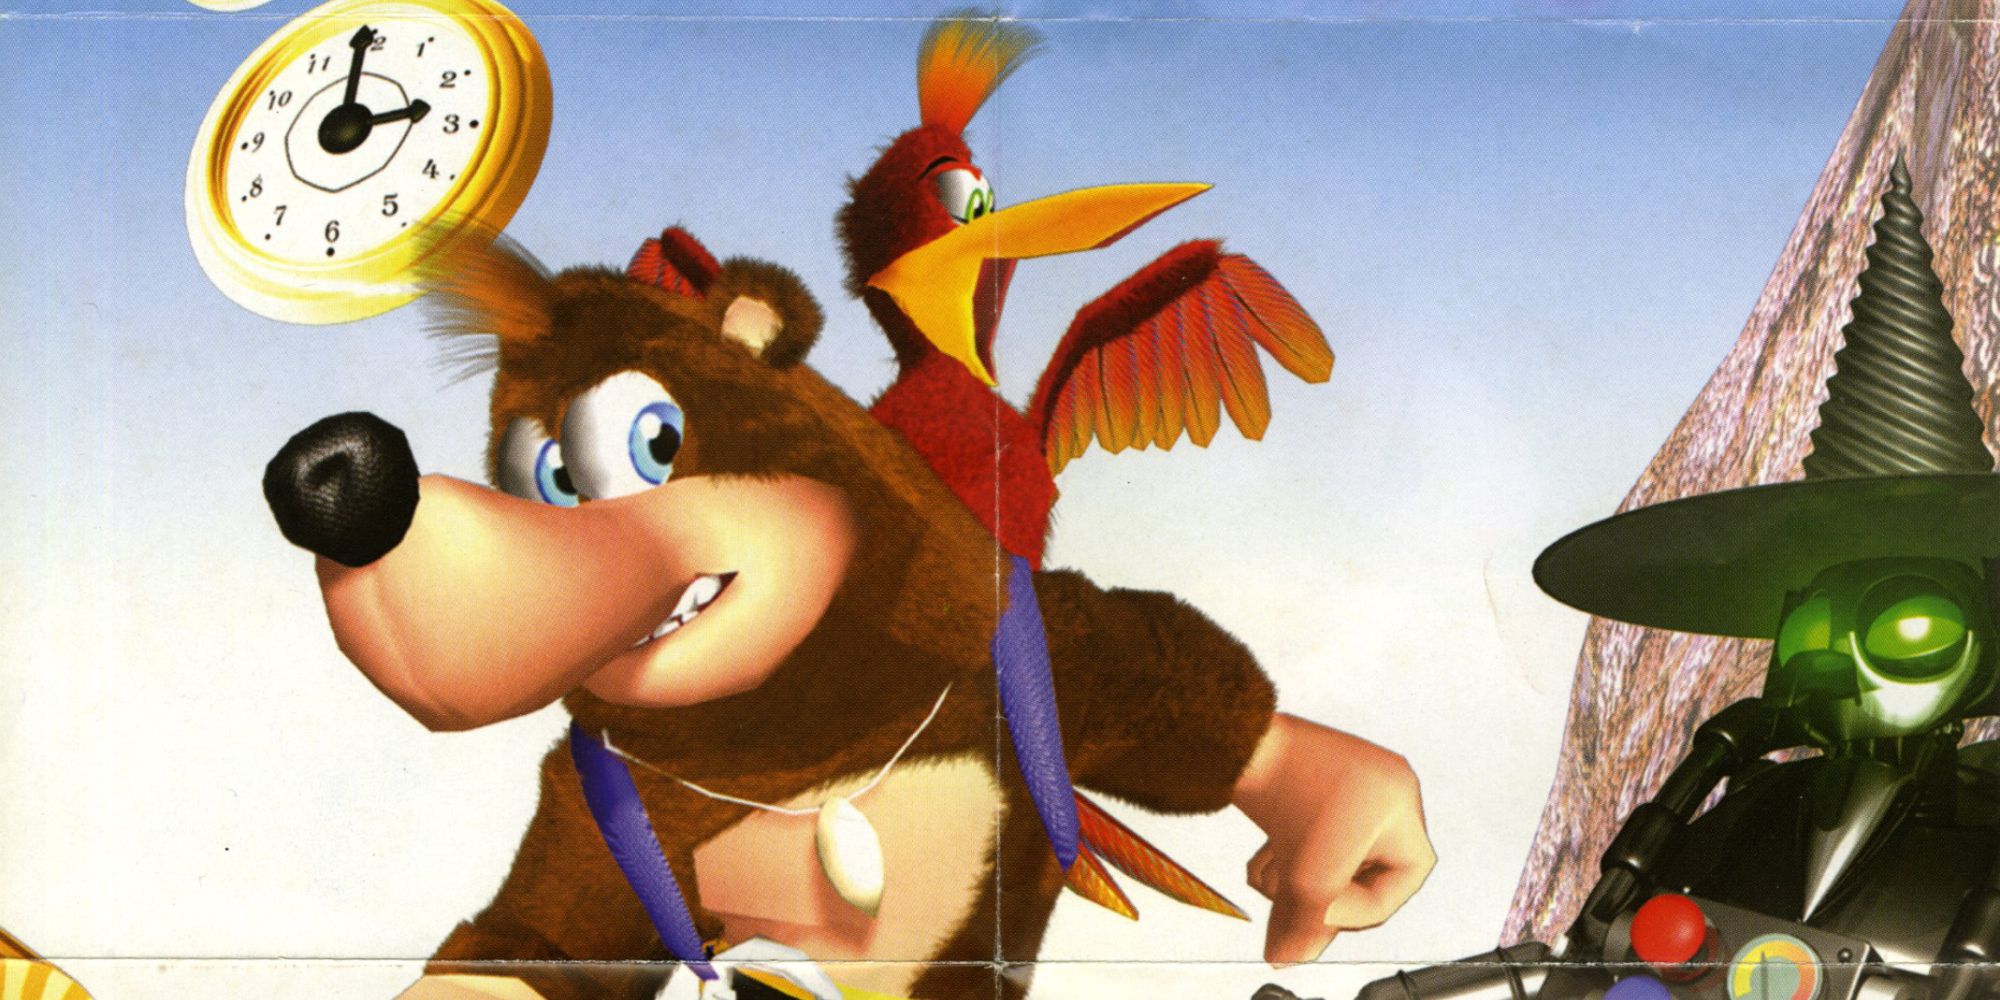 Banjo and Kazooie flee from a robot Gruntilda.